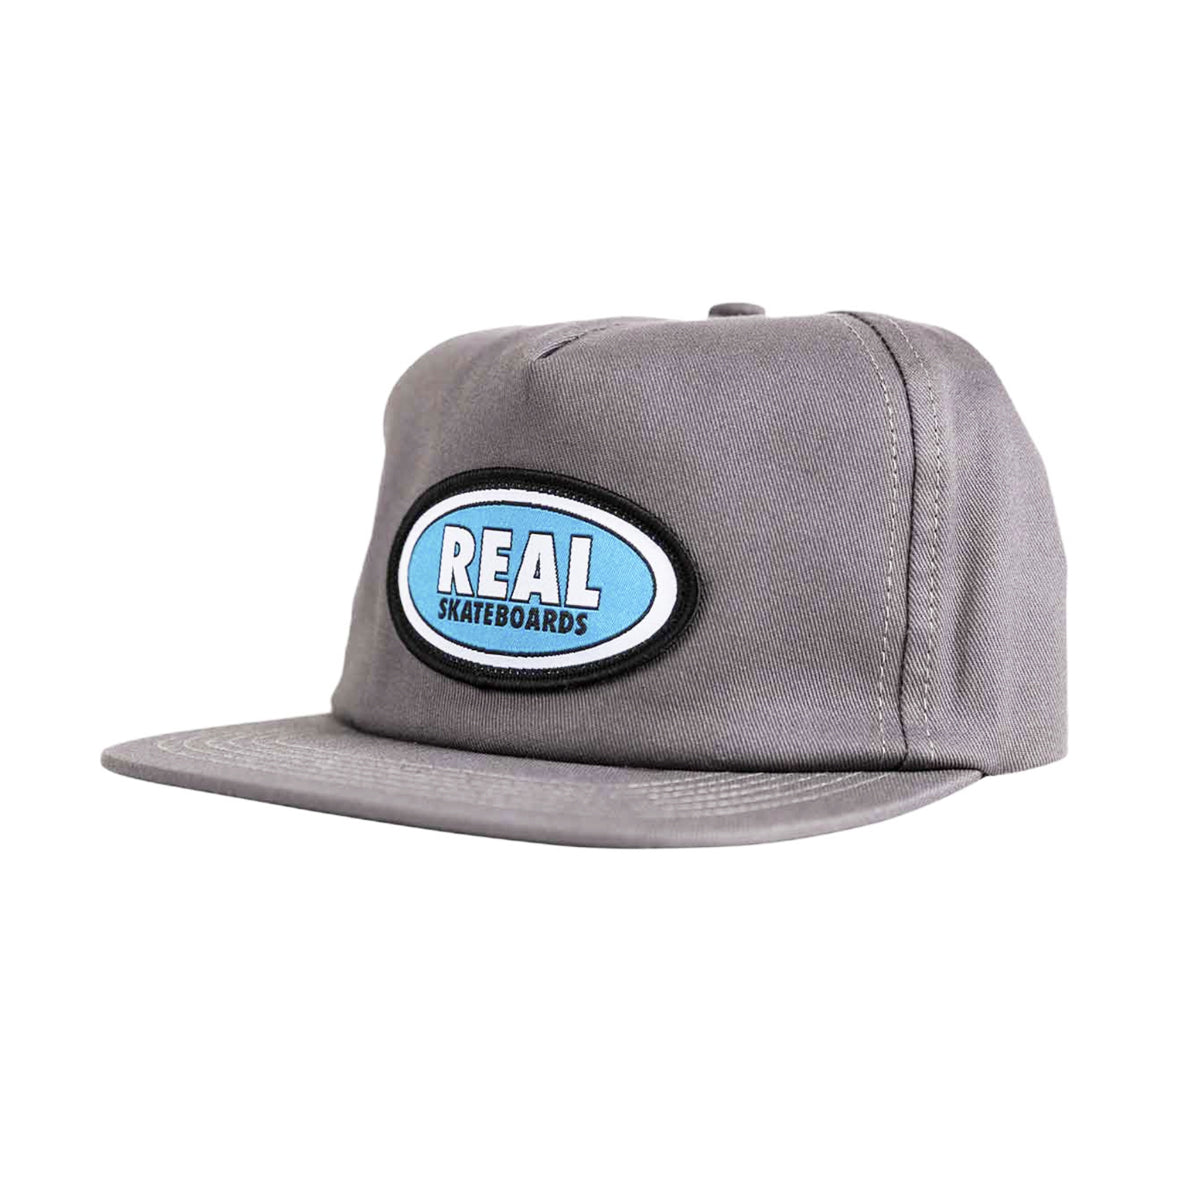 Real Oval Snapback Hat (Charcoal/Blue) - Apple Valley Emporium